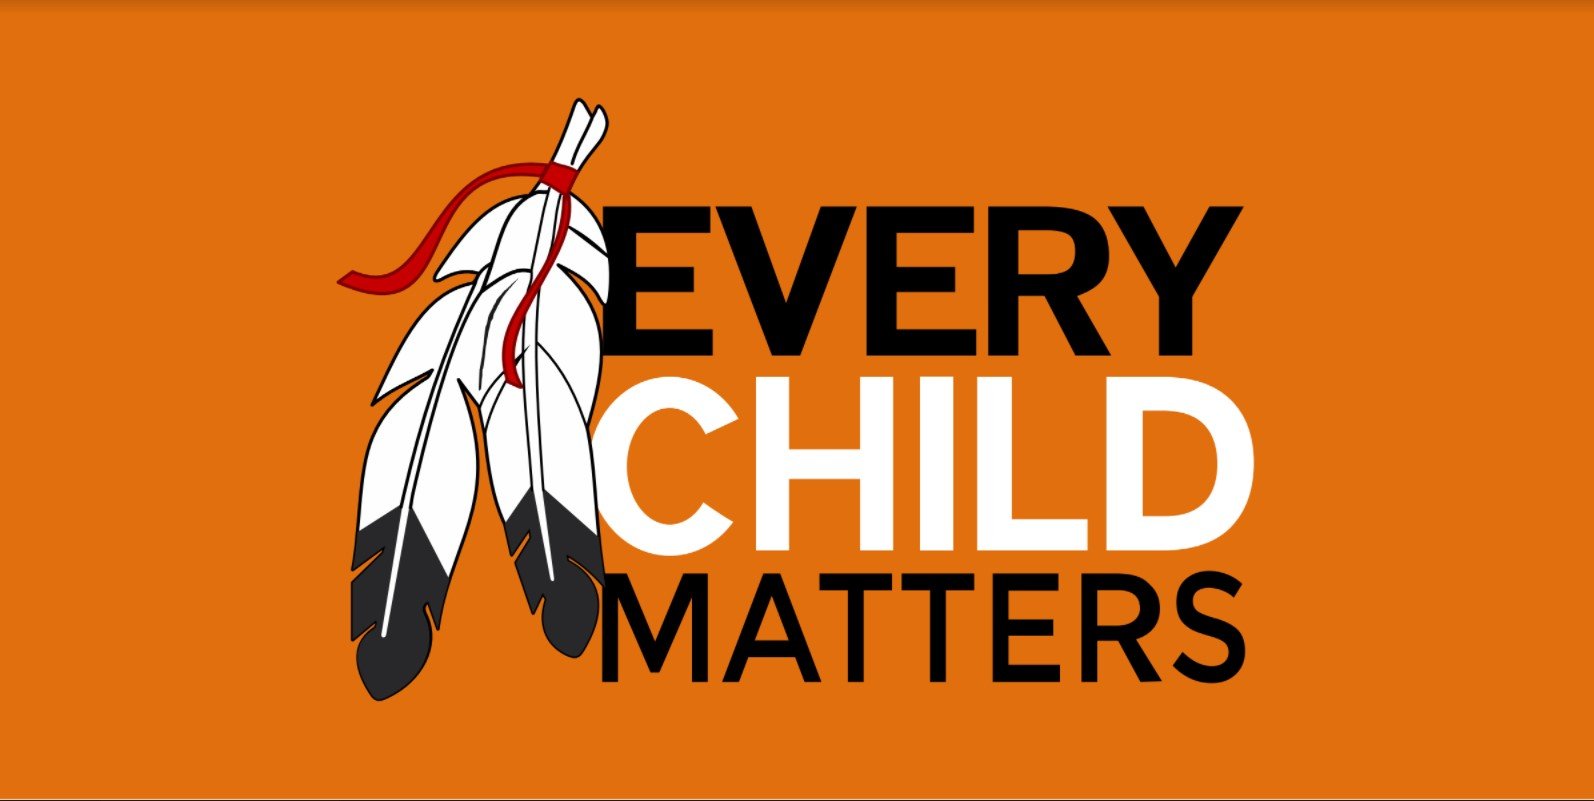 Every Child Matters Written Next to a Pair of Tail Feathers